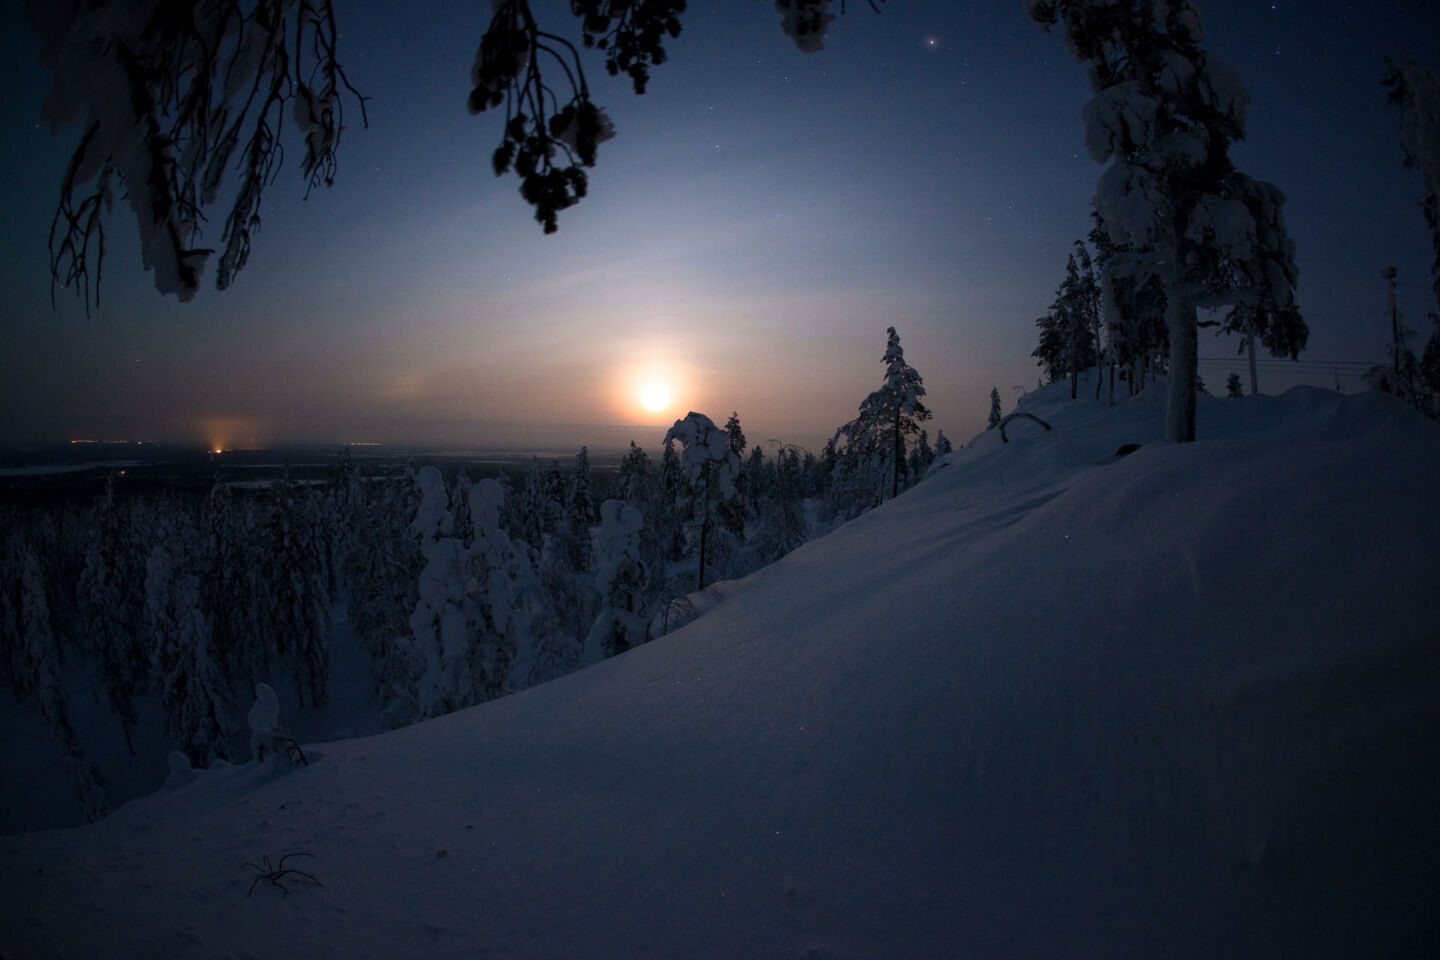 The length of day in Finnish Lapland stretches from 24/7 in summer to polar night that lasts weeks in winter